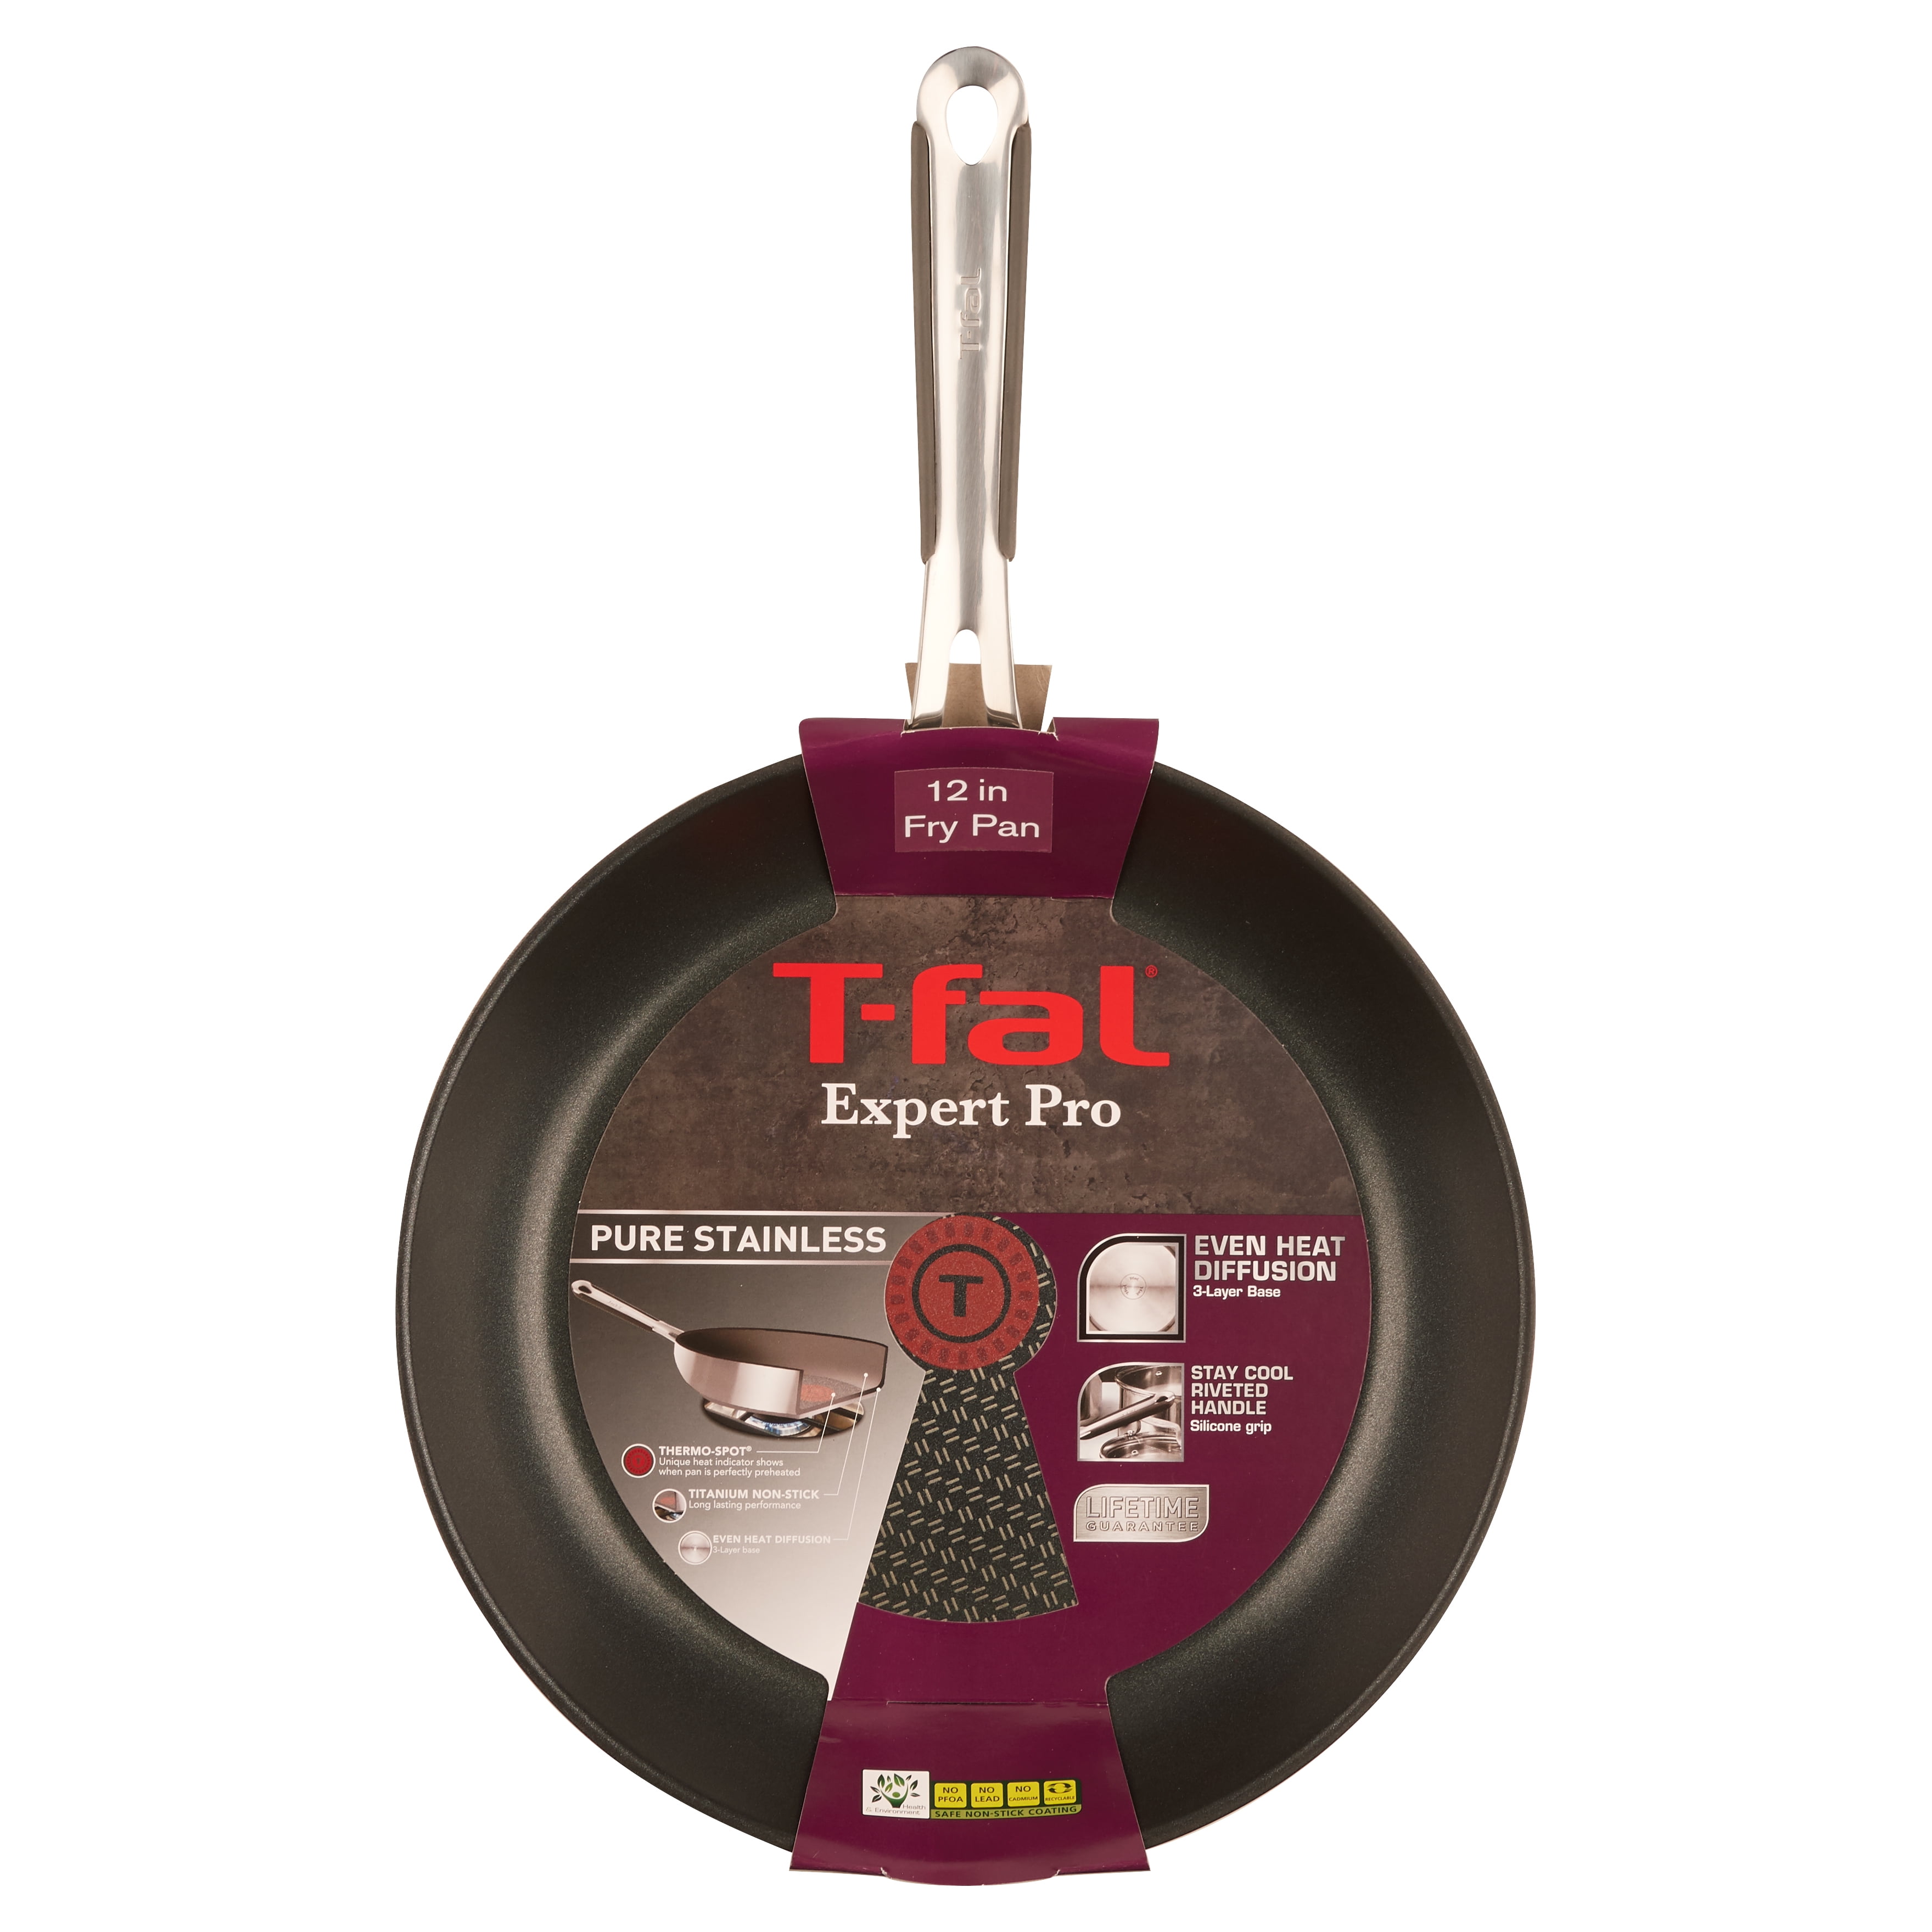 T-fal Professional VX3 Brushed Nonstick with Stainless Steel Handle Fry Pan  12 Inch, Oven Broiler Safe 400F Cookware, Pots and Pans, Restaurant Grade